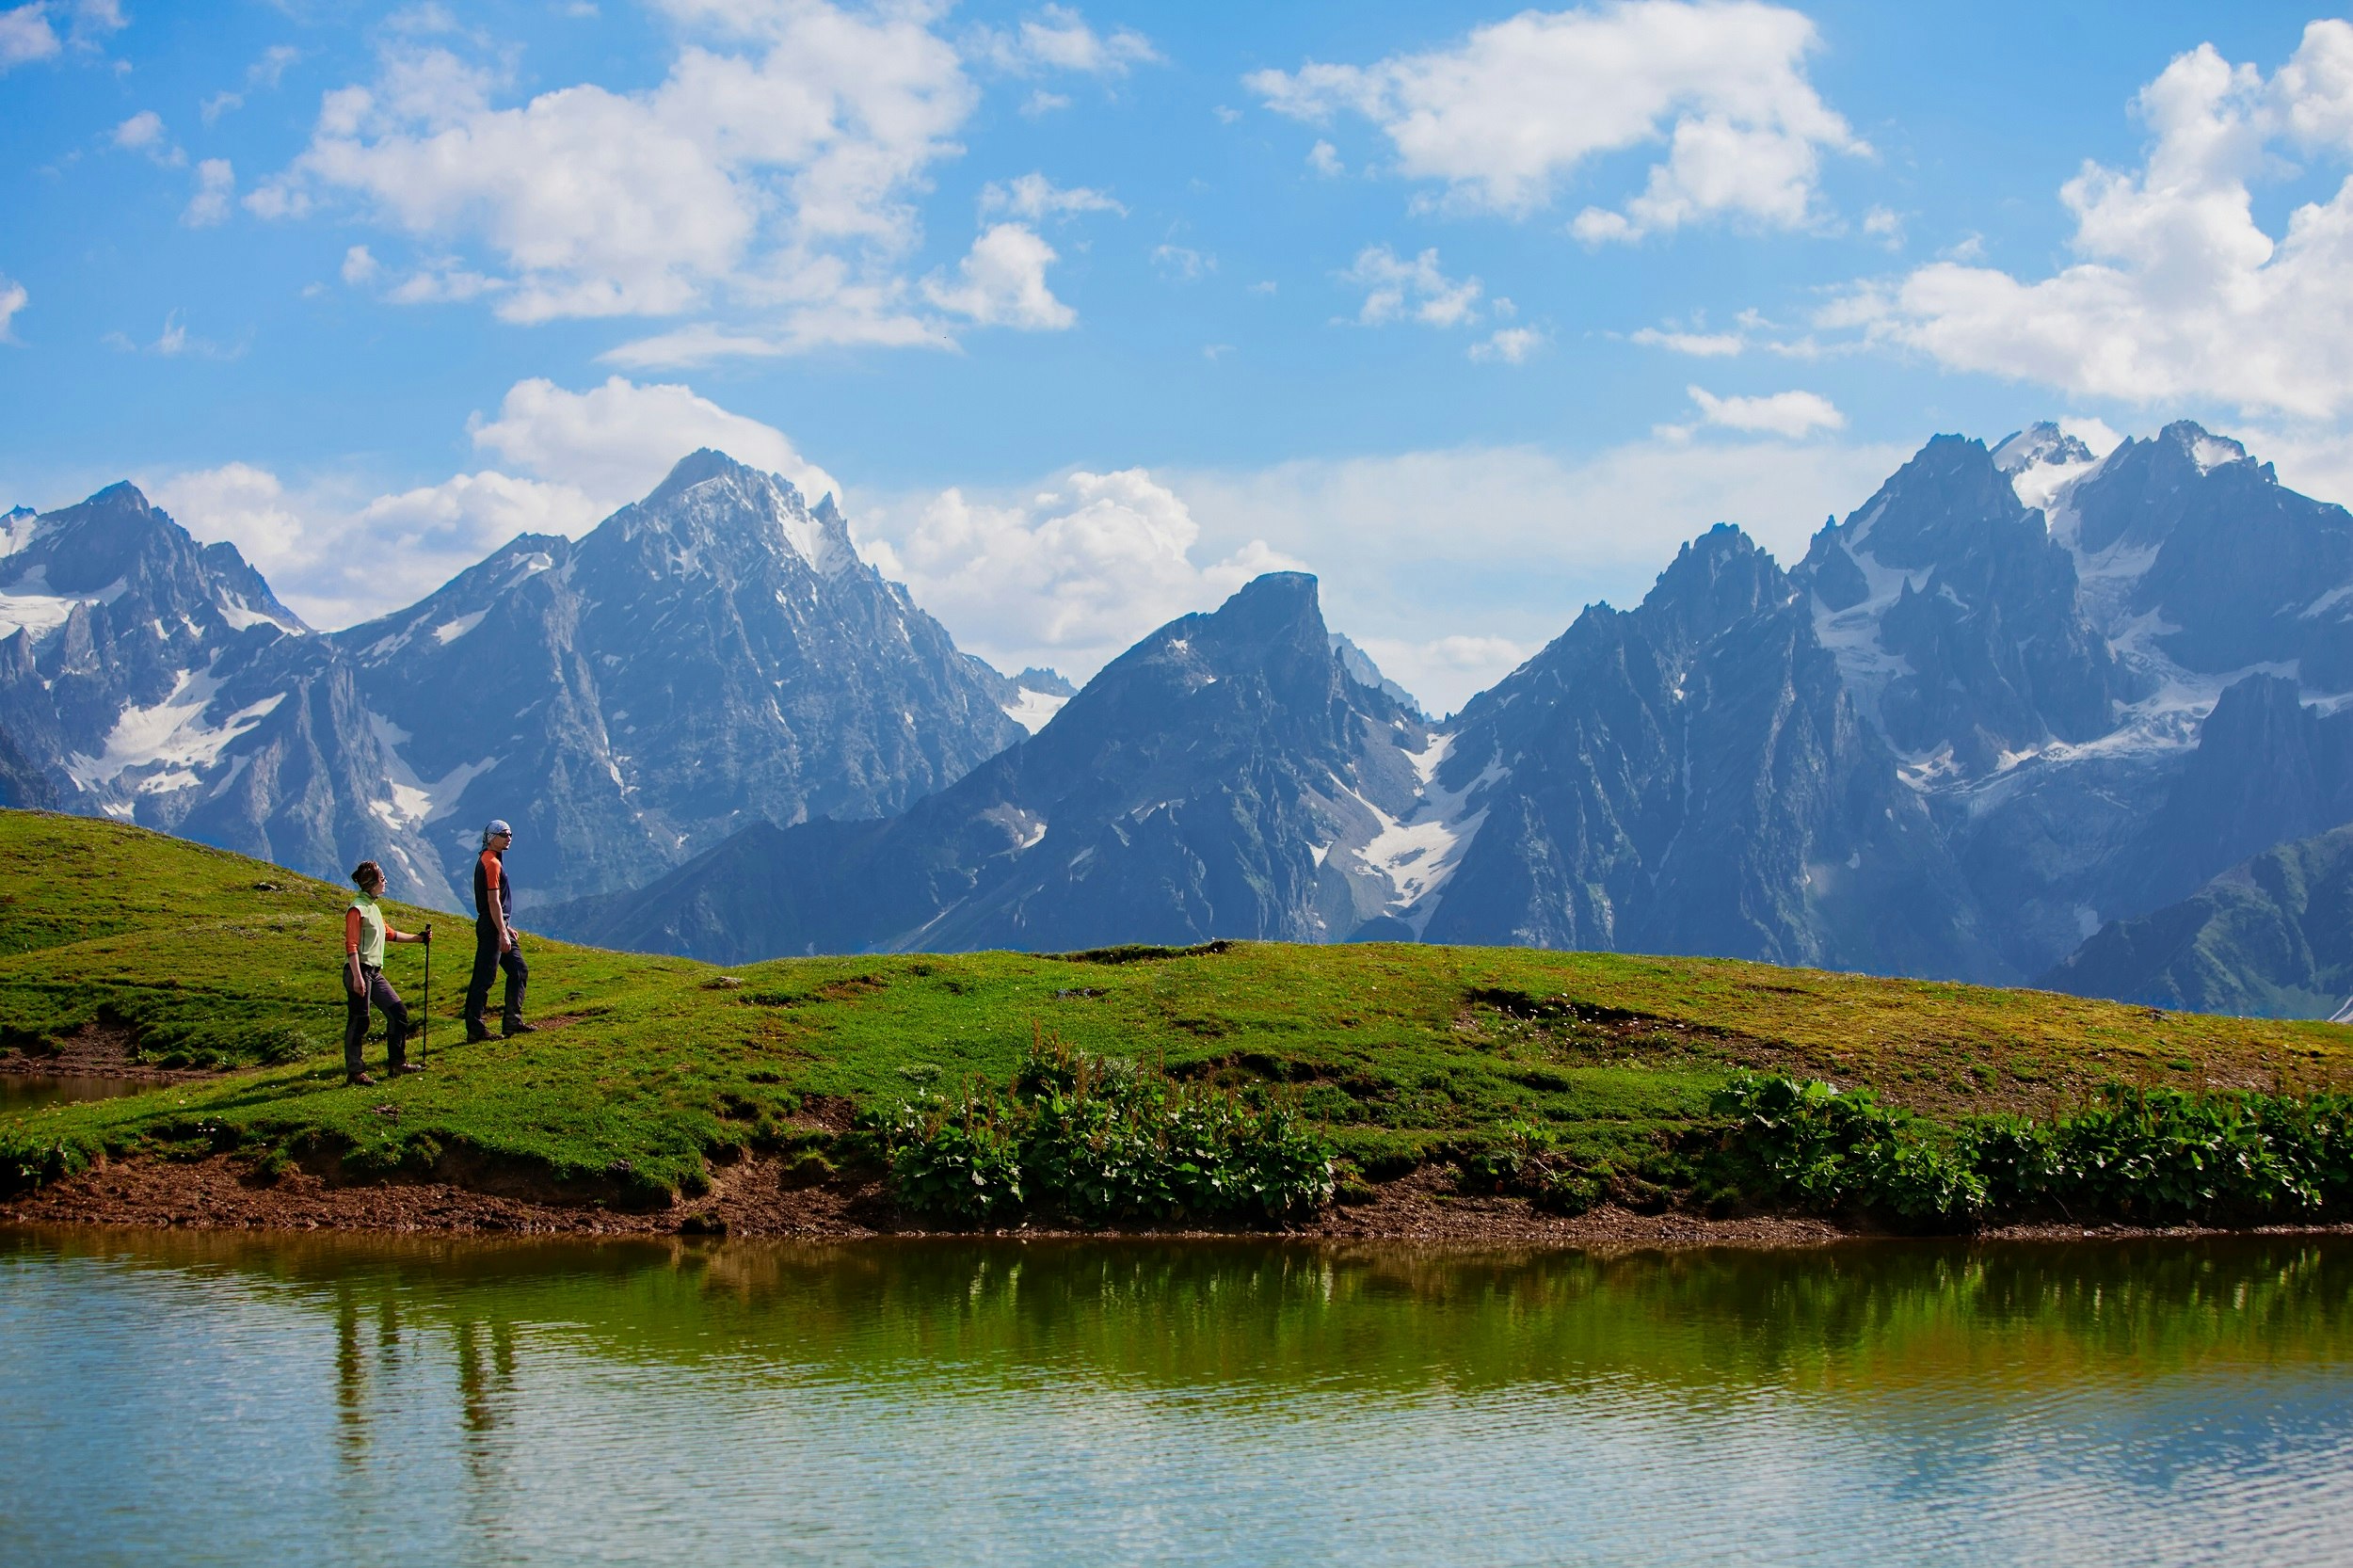 Two people walk beside a lake. In the distance is a huge range of pointed mountains.